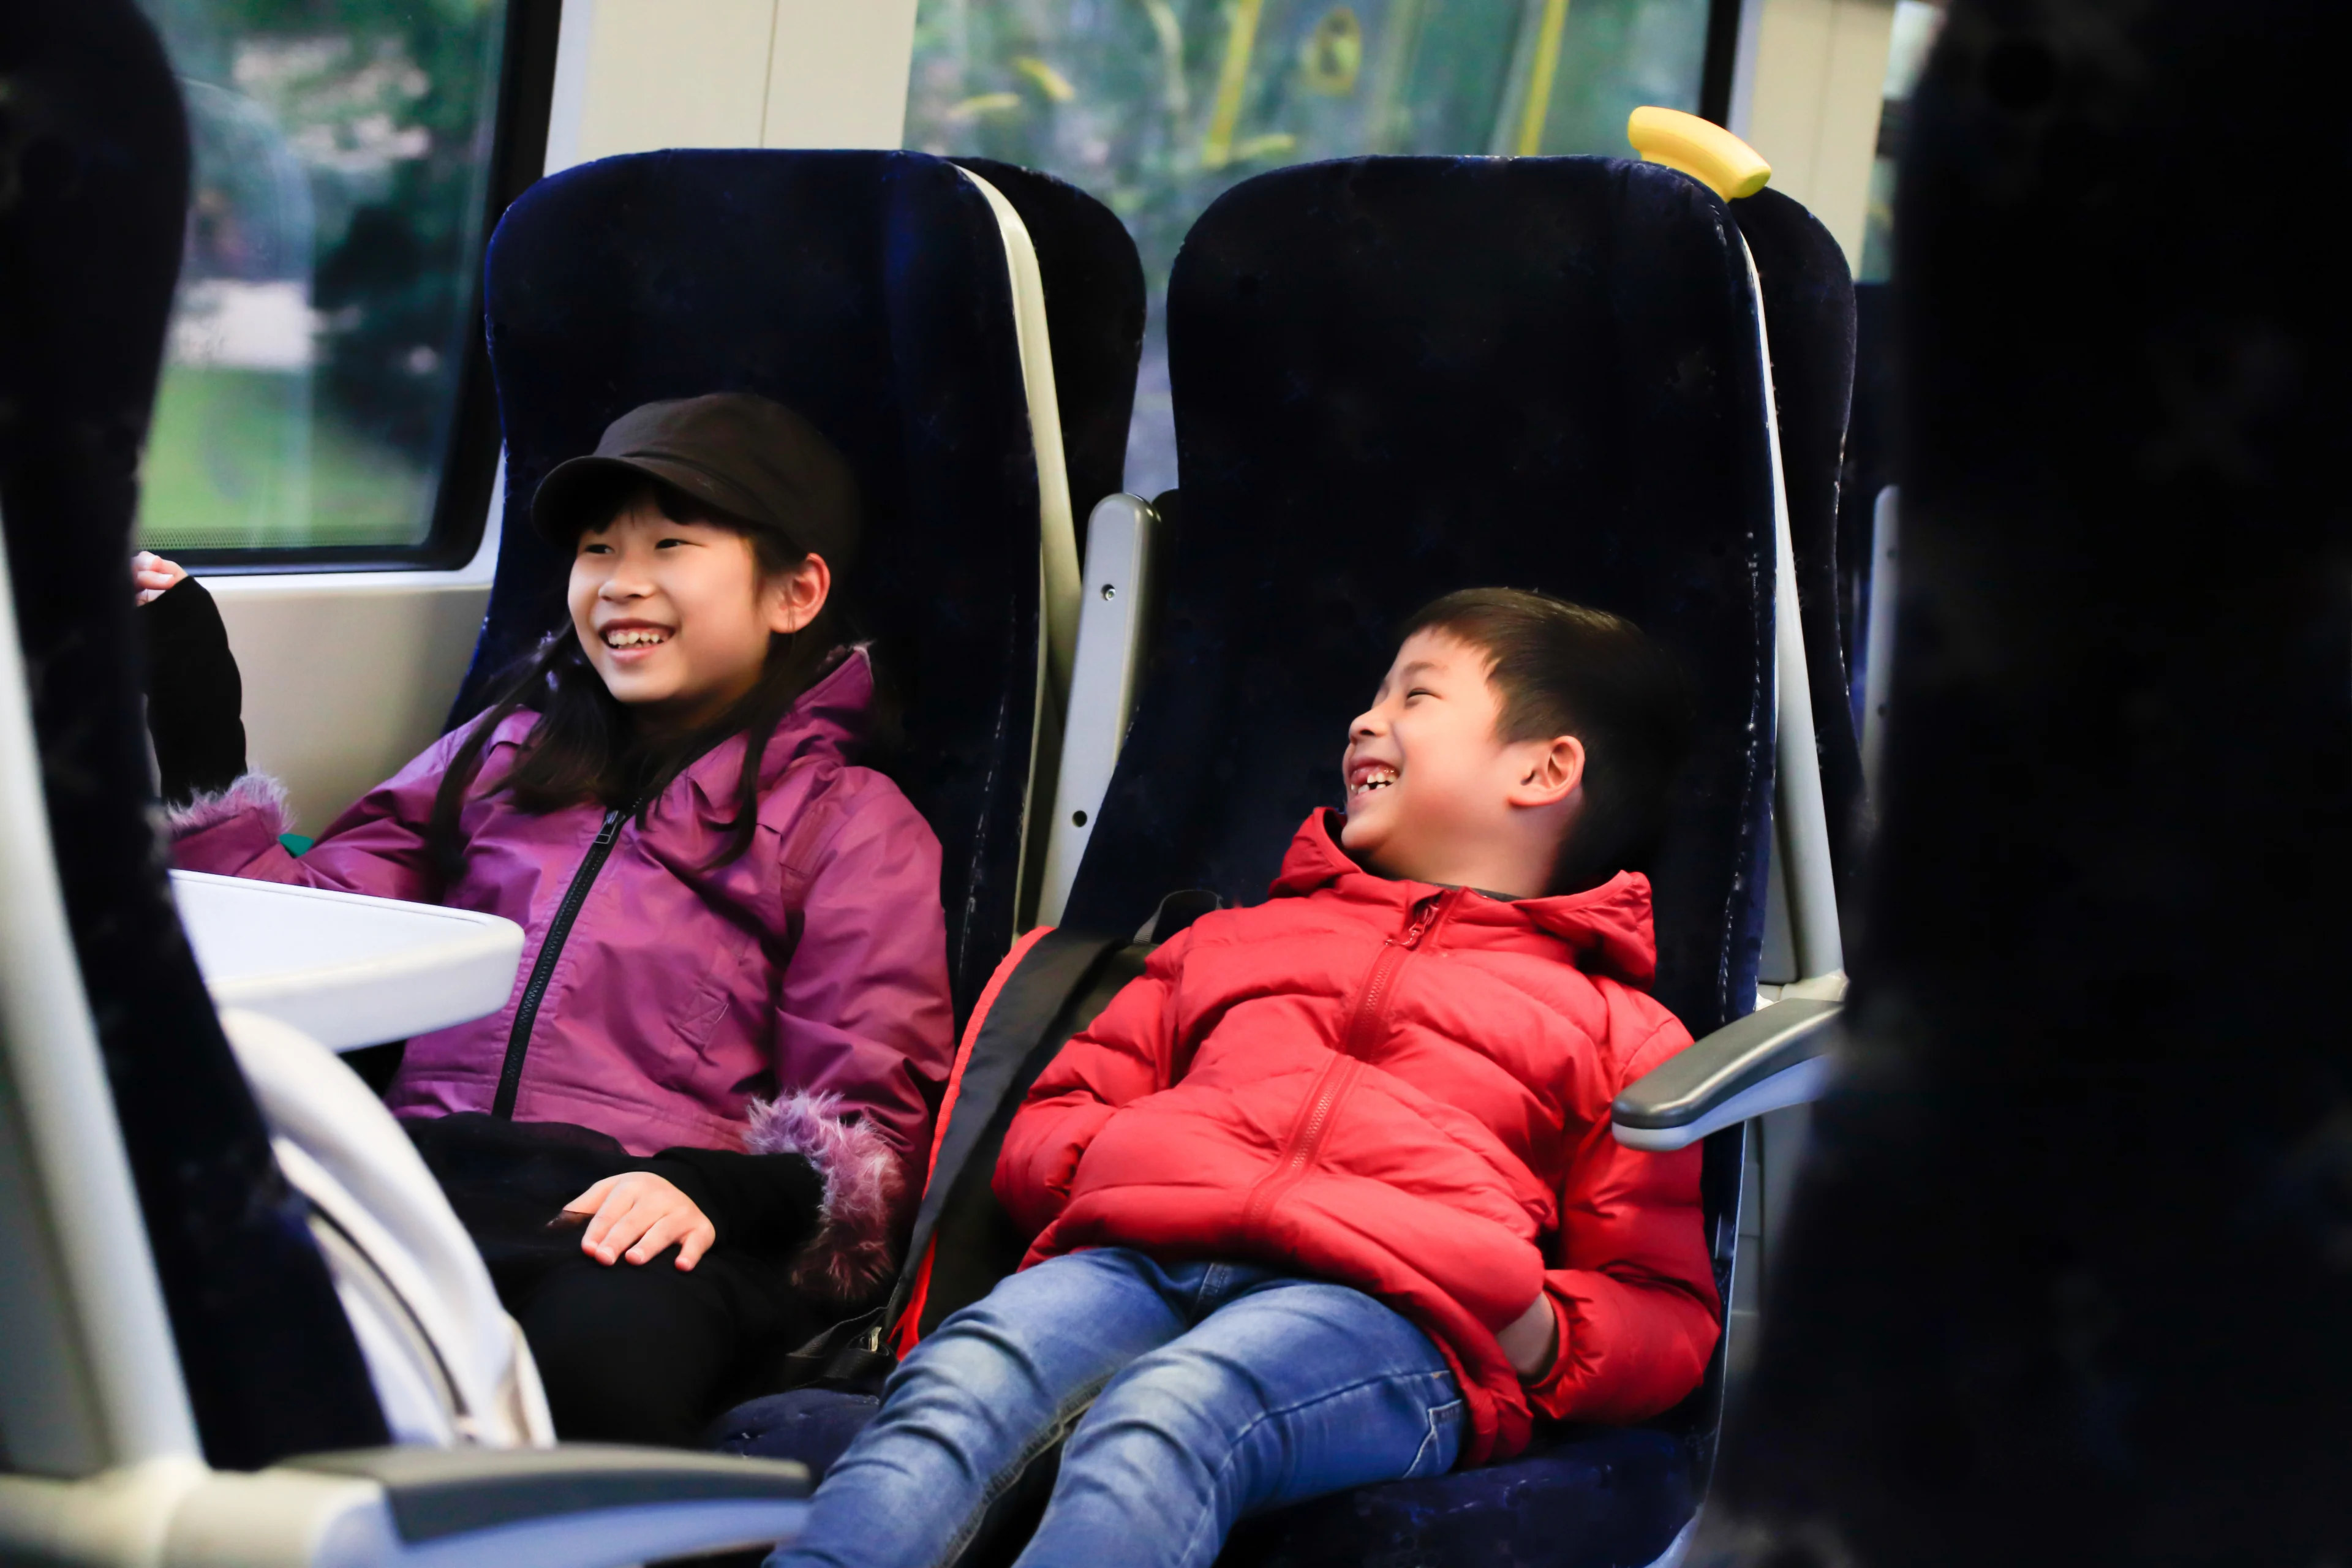 2 young children sitting on a train are laughing and smiling